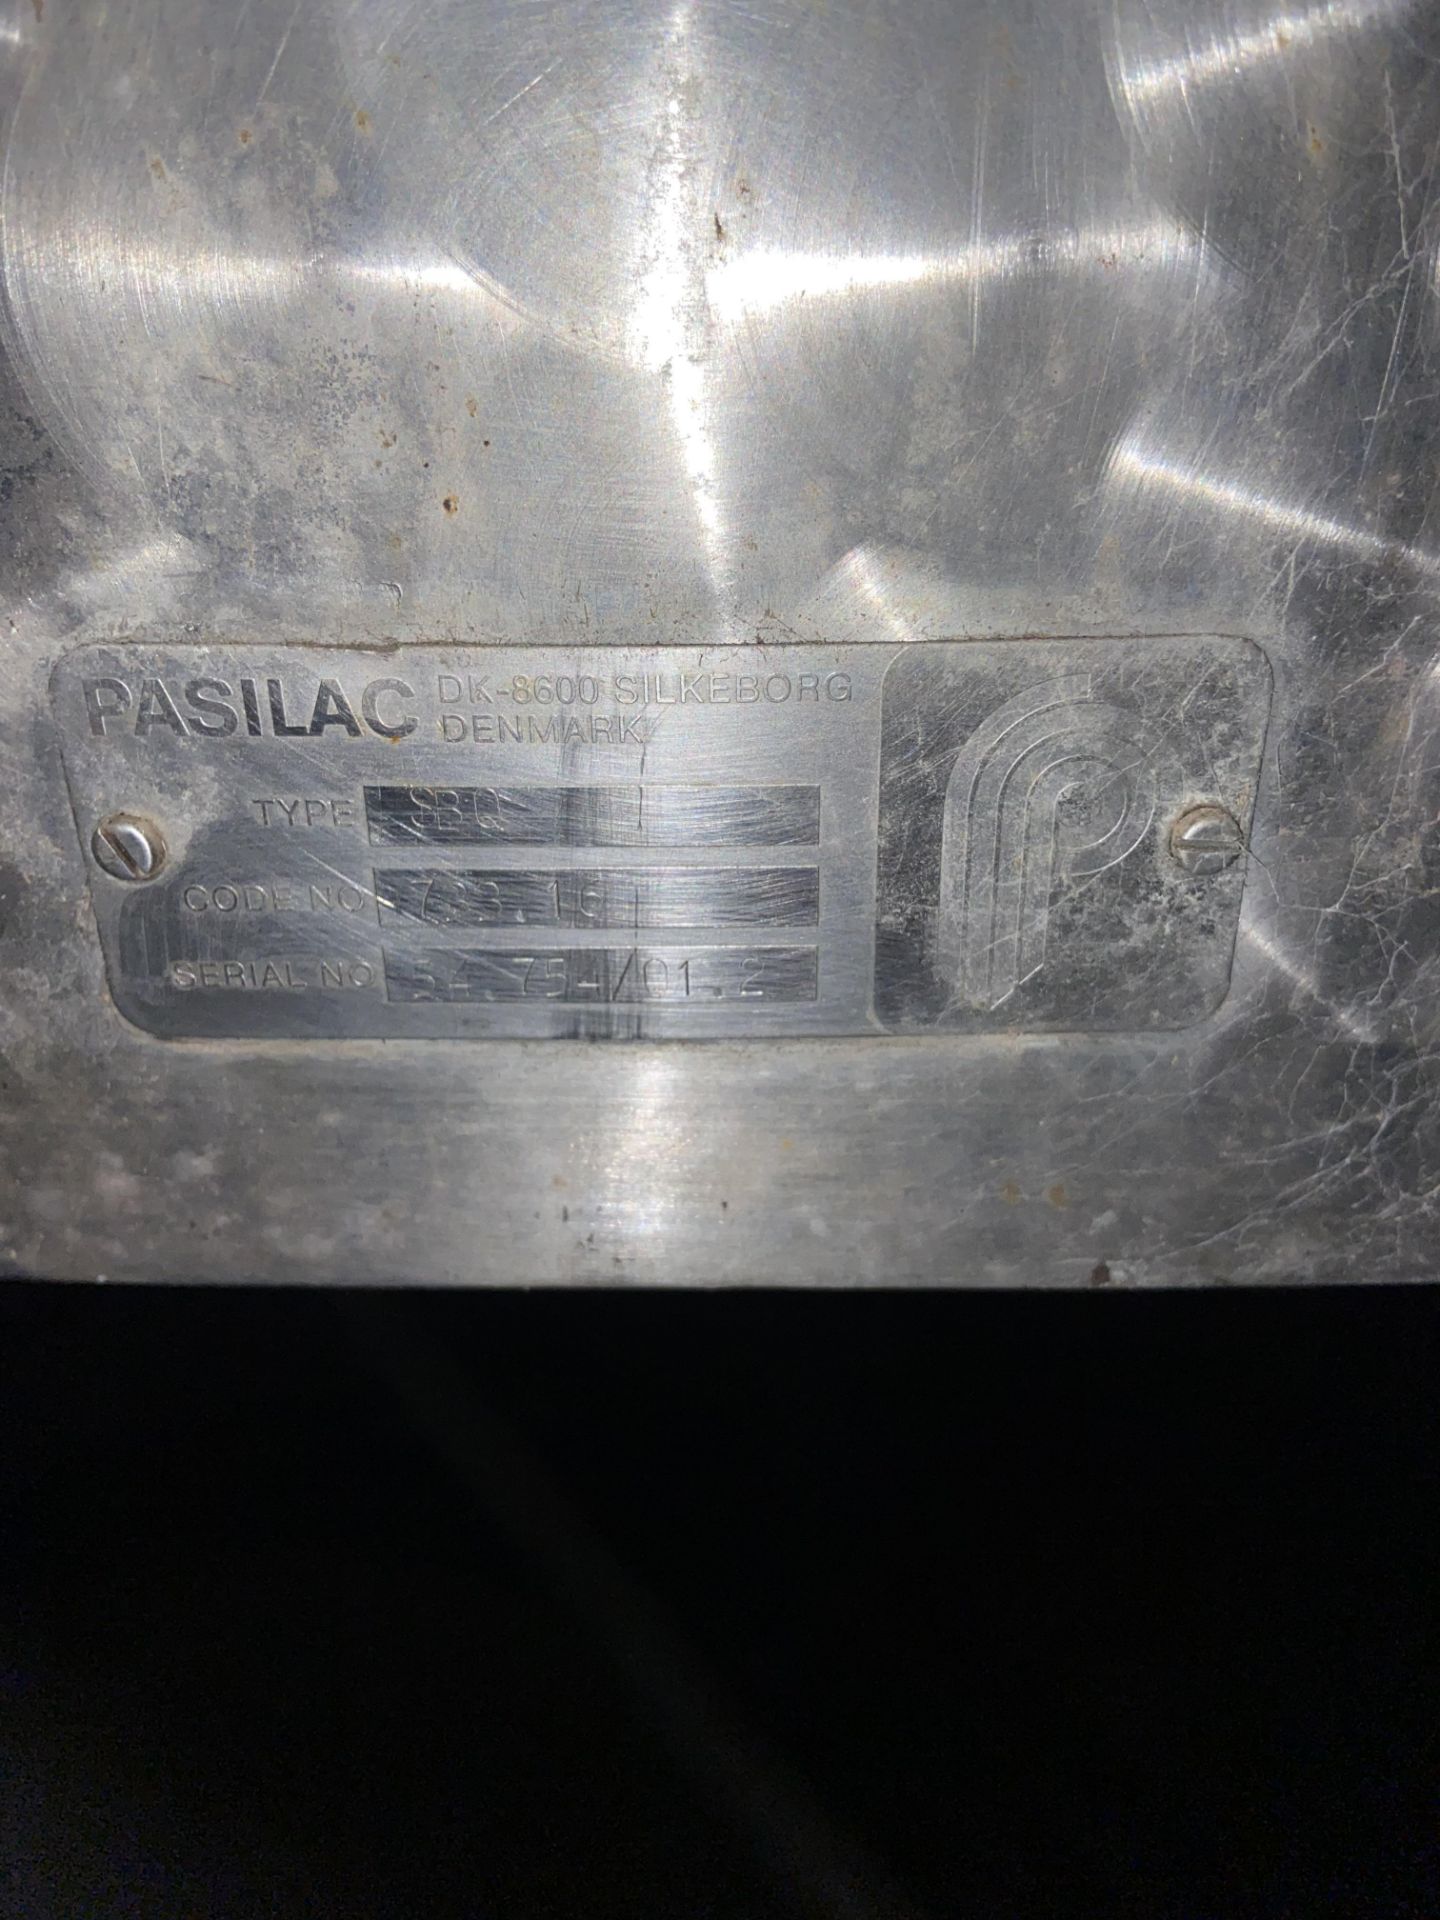 Pasilac SBQ VERTICAL STAINLESS STEEL MIXING VESSEL, code no. 733.16, serial no. 54.754/01.2, approx. - Bild 4 aus 4